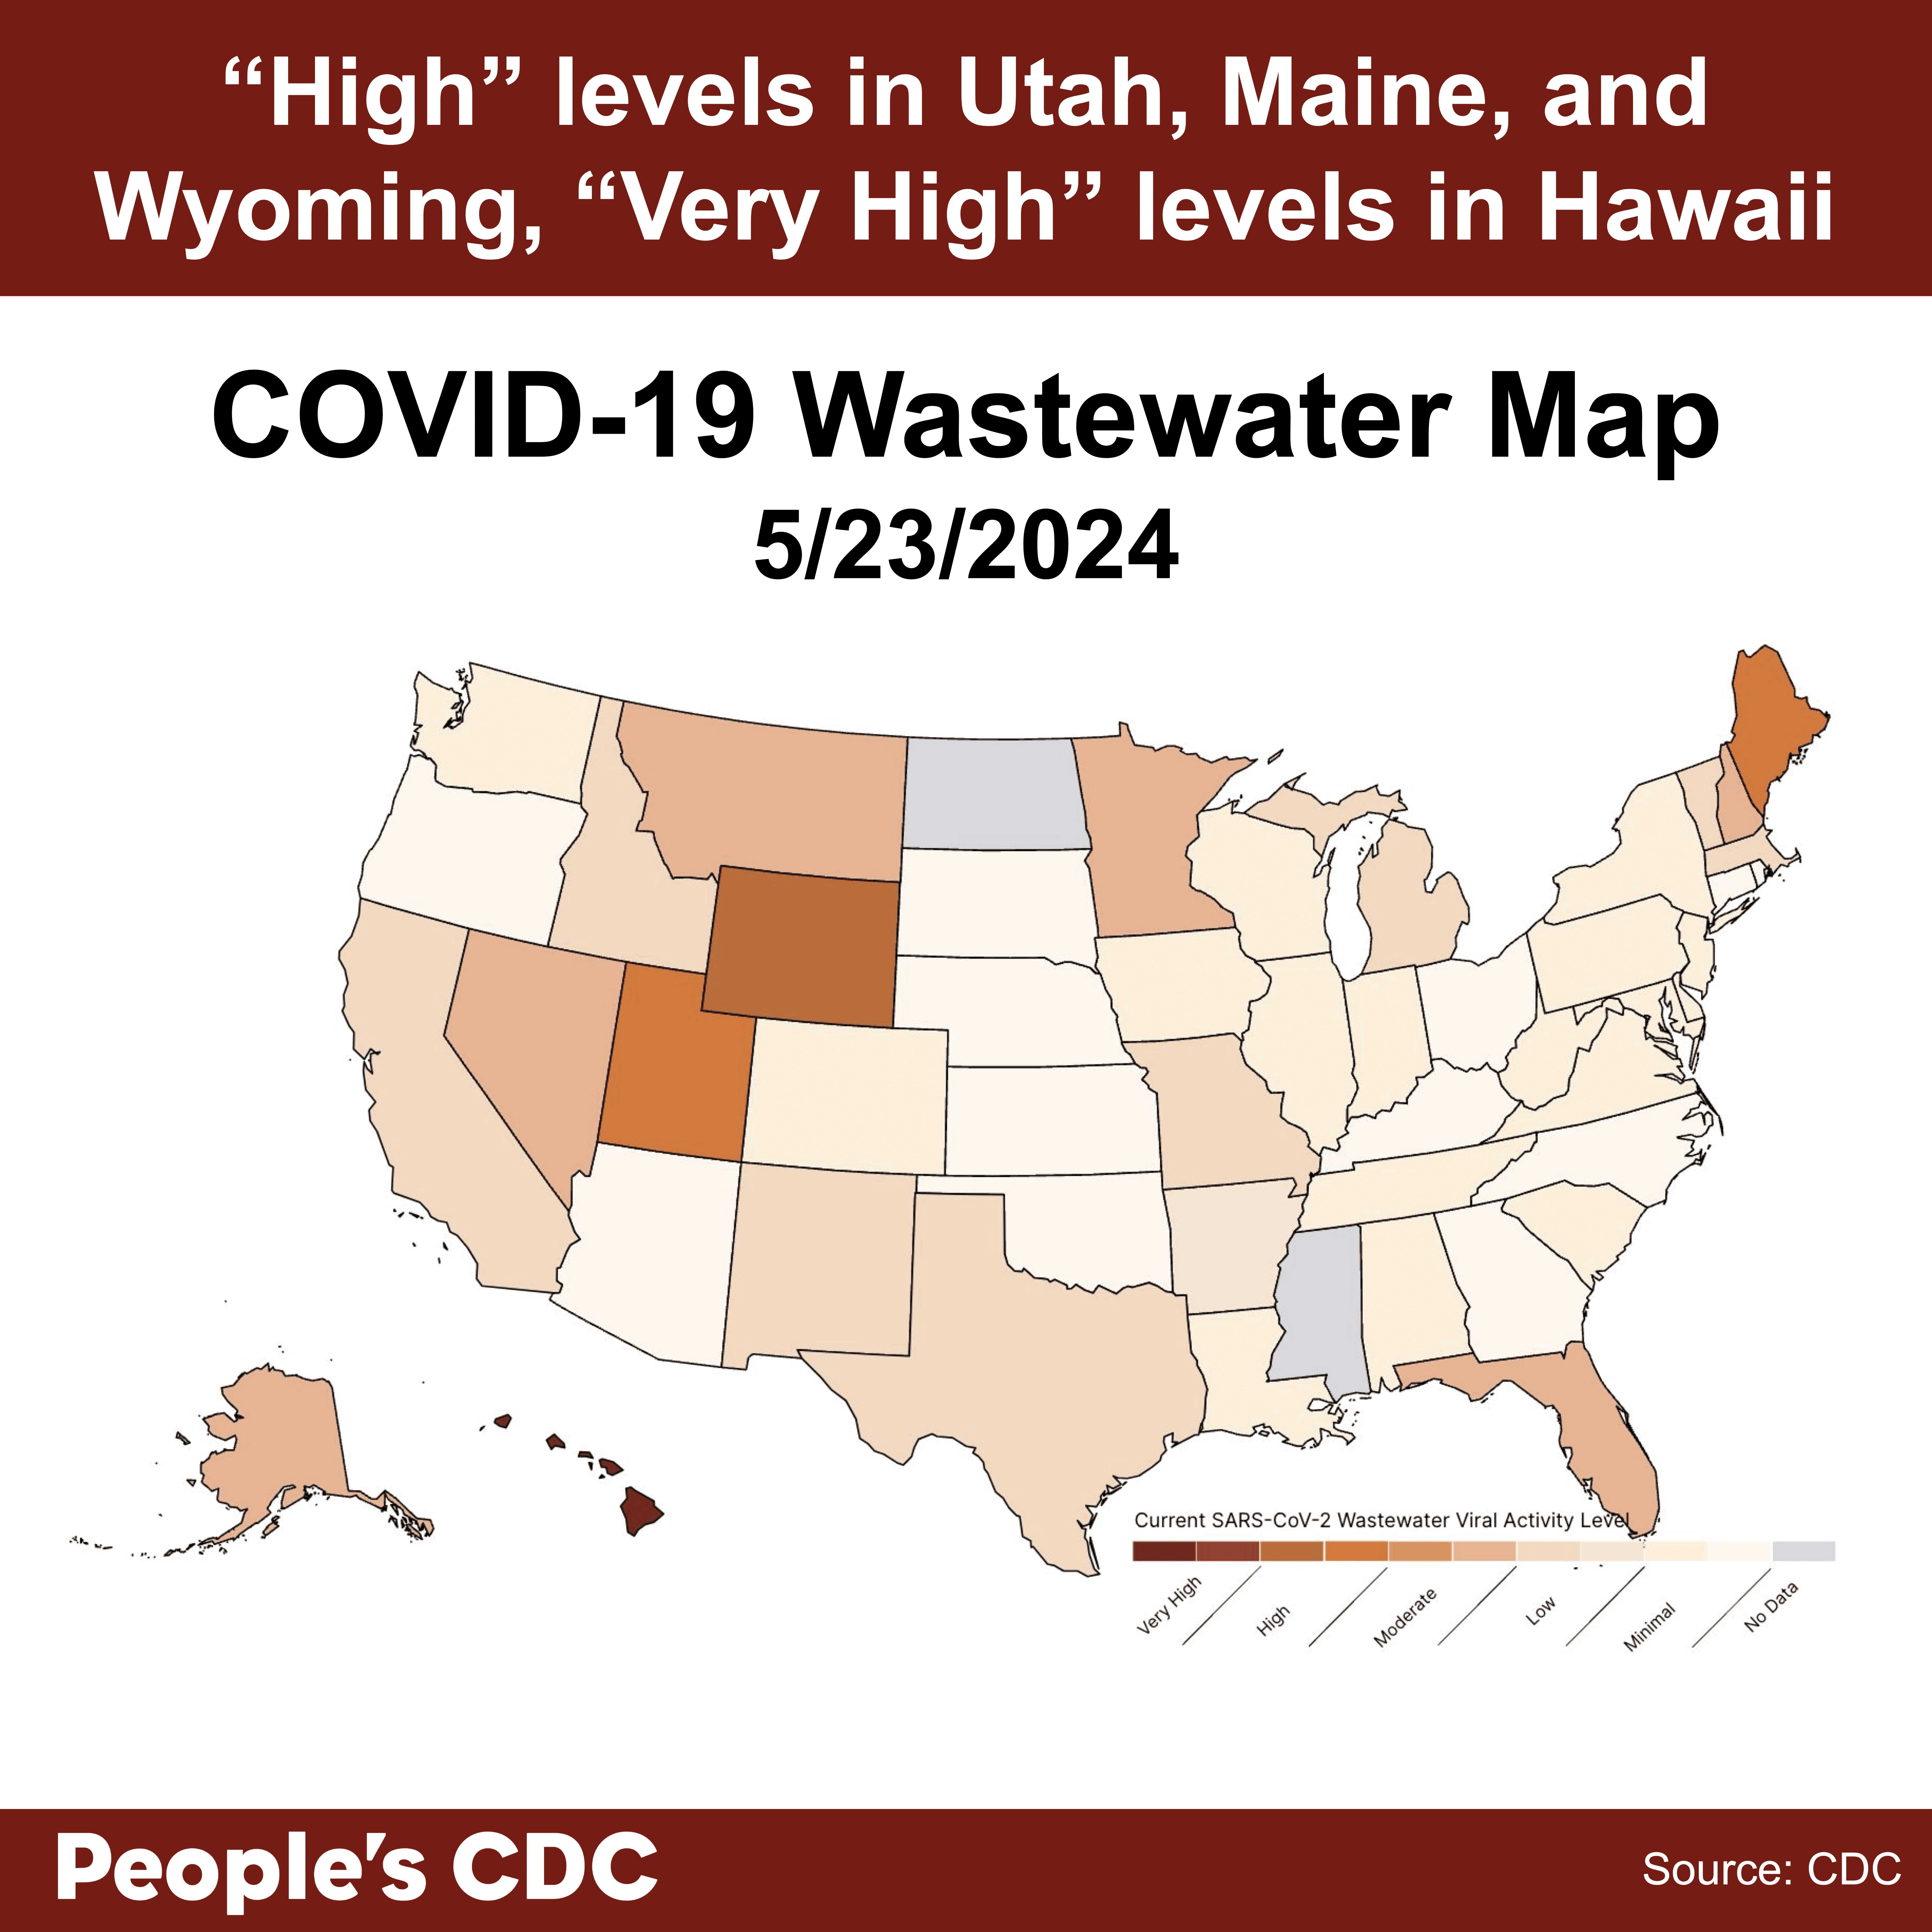 A map of the United States color-coded in shades of orange and gray displaying SARS-CoV-2 Wastewater Viral Activity level as of May 23, 2024, where deeper tones correlate to higher viral activity and gray indicates “Insufficient,” or “No Data.” Viral activity is “Very High” or “High” in 4 states. Wastewater levels are “Low” or “Minimal” in other reporting states and territories, with no data available from 2 states and 3 territories. Text above map reads “High levels in Utah, Maine and Wyoming, Very High levels in Hawaii People’s CDC. Source: CDC.”